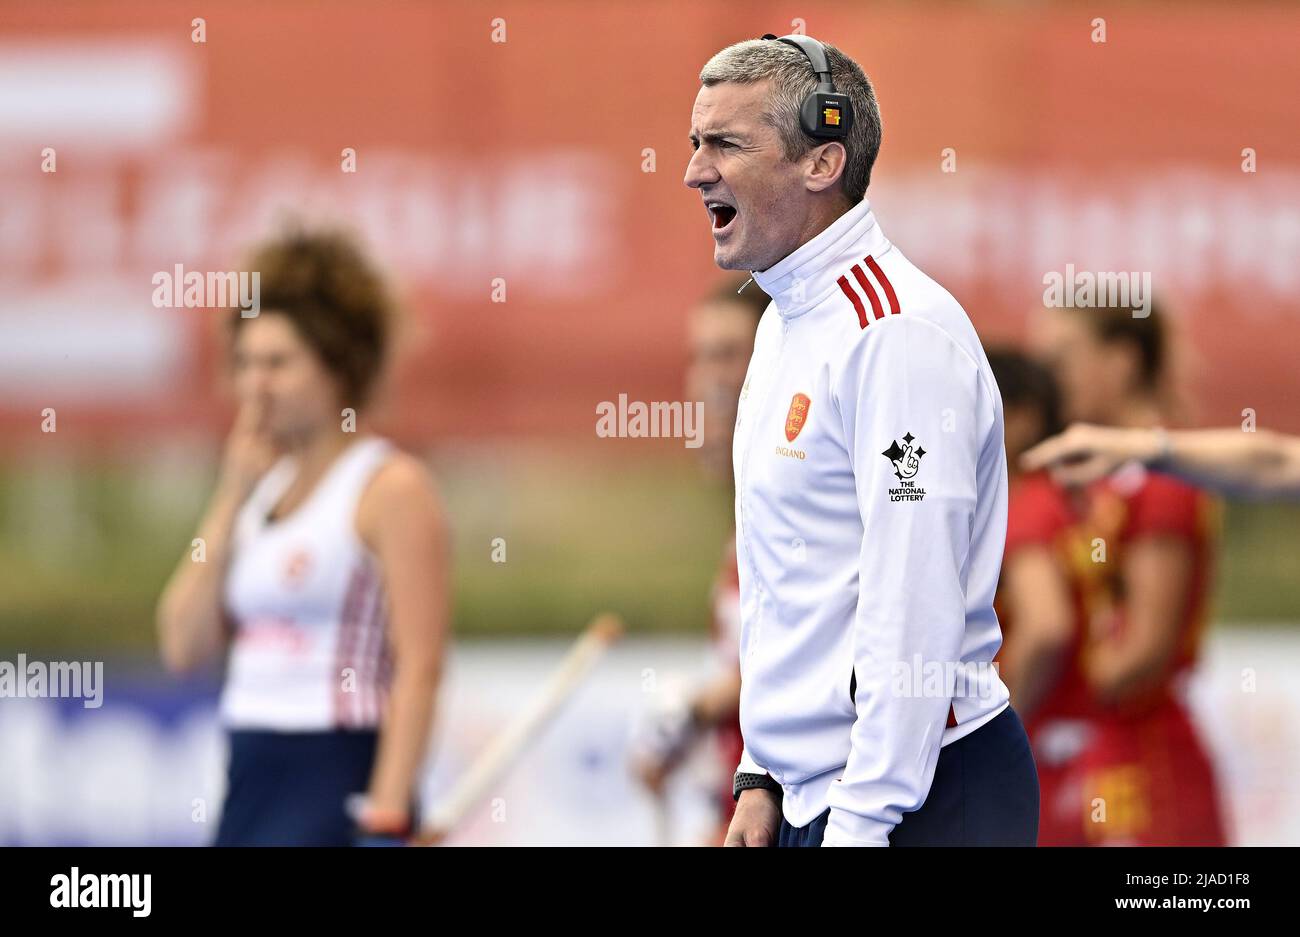 Stratford, United Kingdom. 29th May, 2022. England V Spain Womens FIH Pro League. Lee Valley Hockey centre. Stratford. David Ralph (England coach) shouts during the England V Spain Womens FIH Pro League hockey match. Credit: Sport In Pictures/Alamy Live News Stock Photo